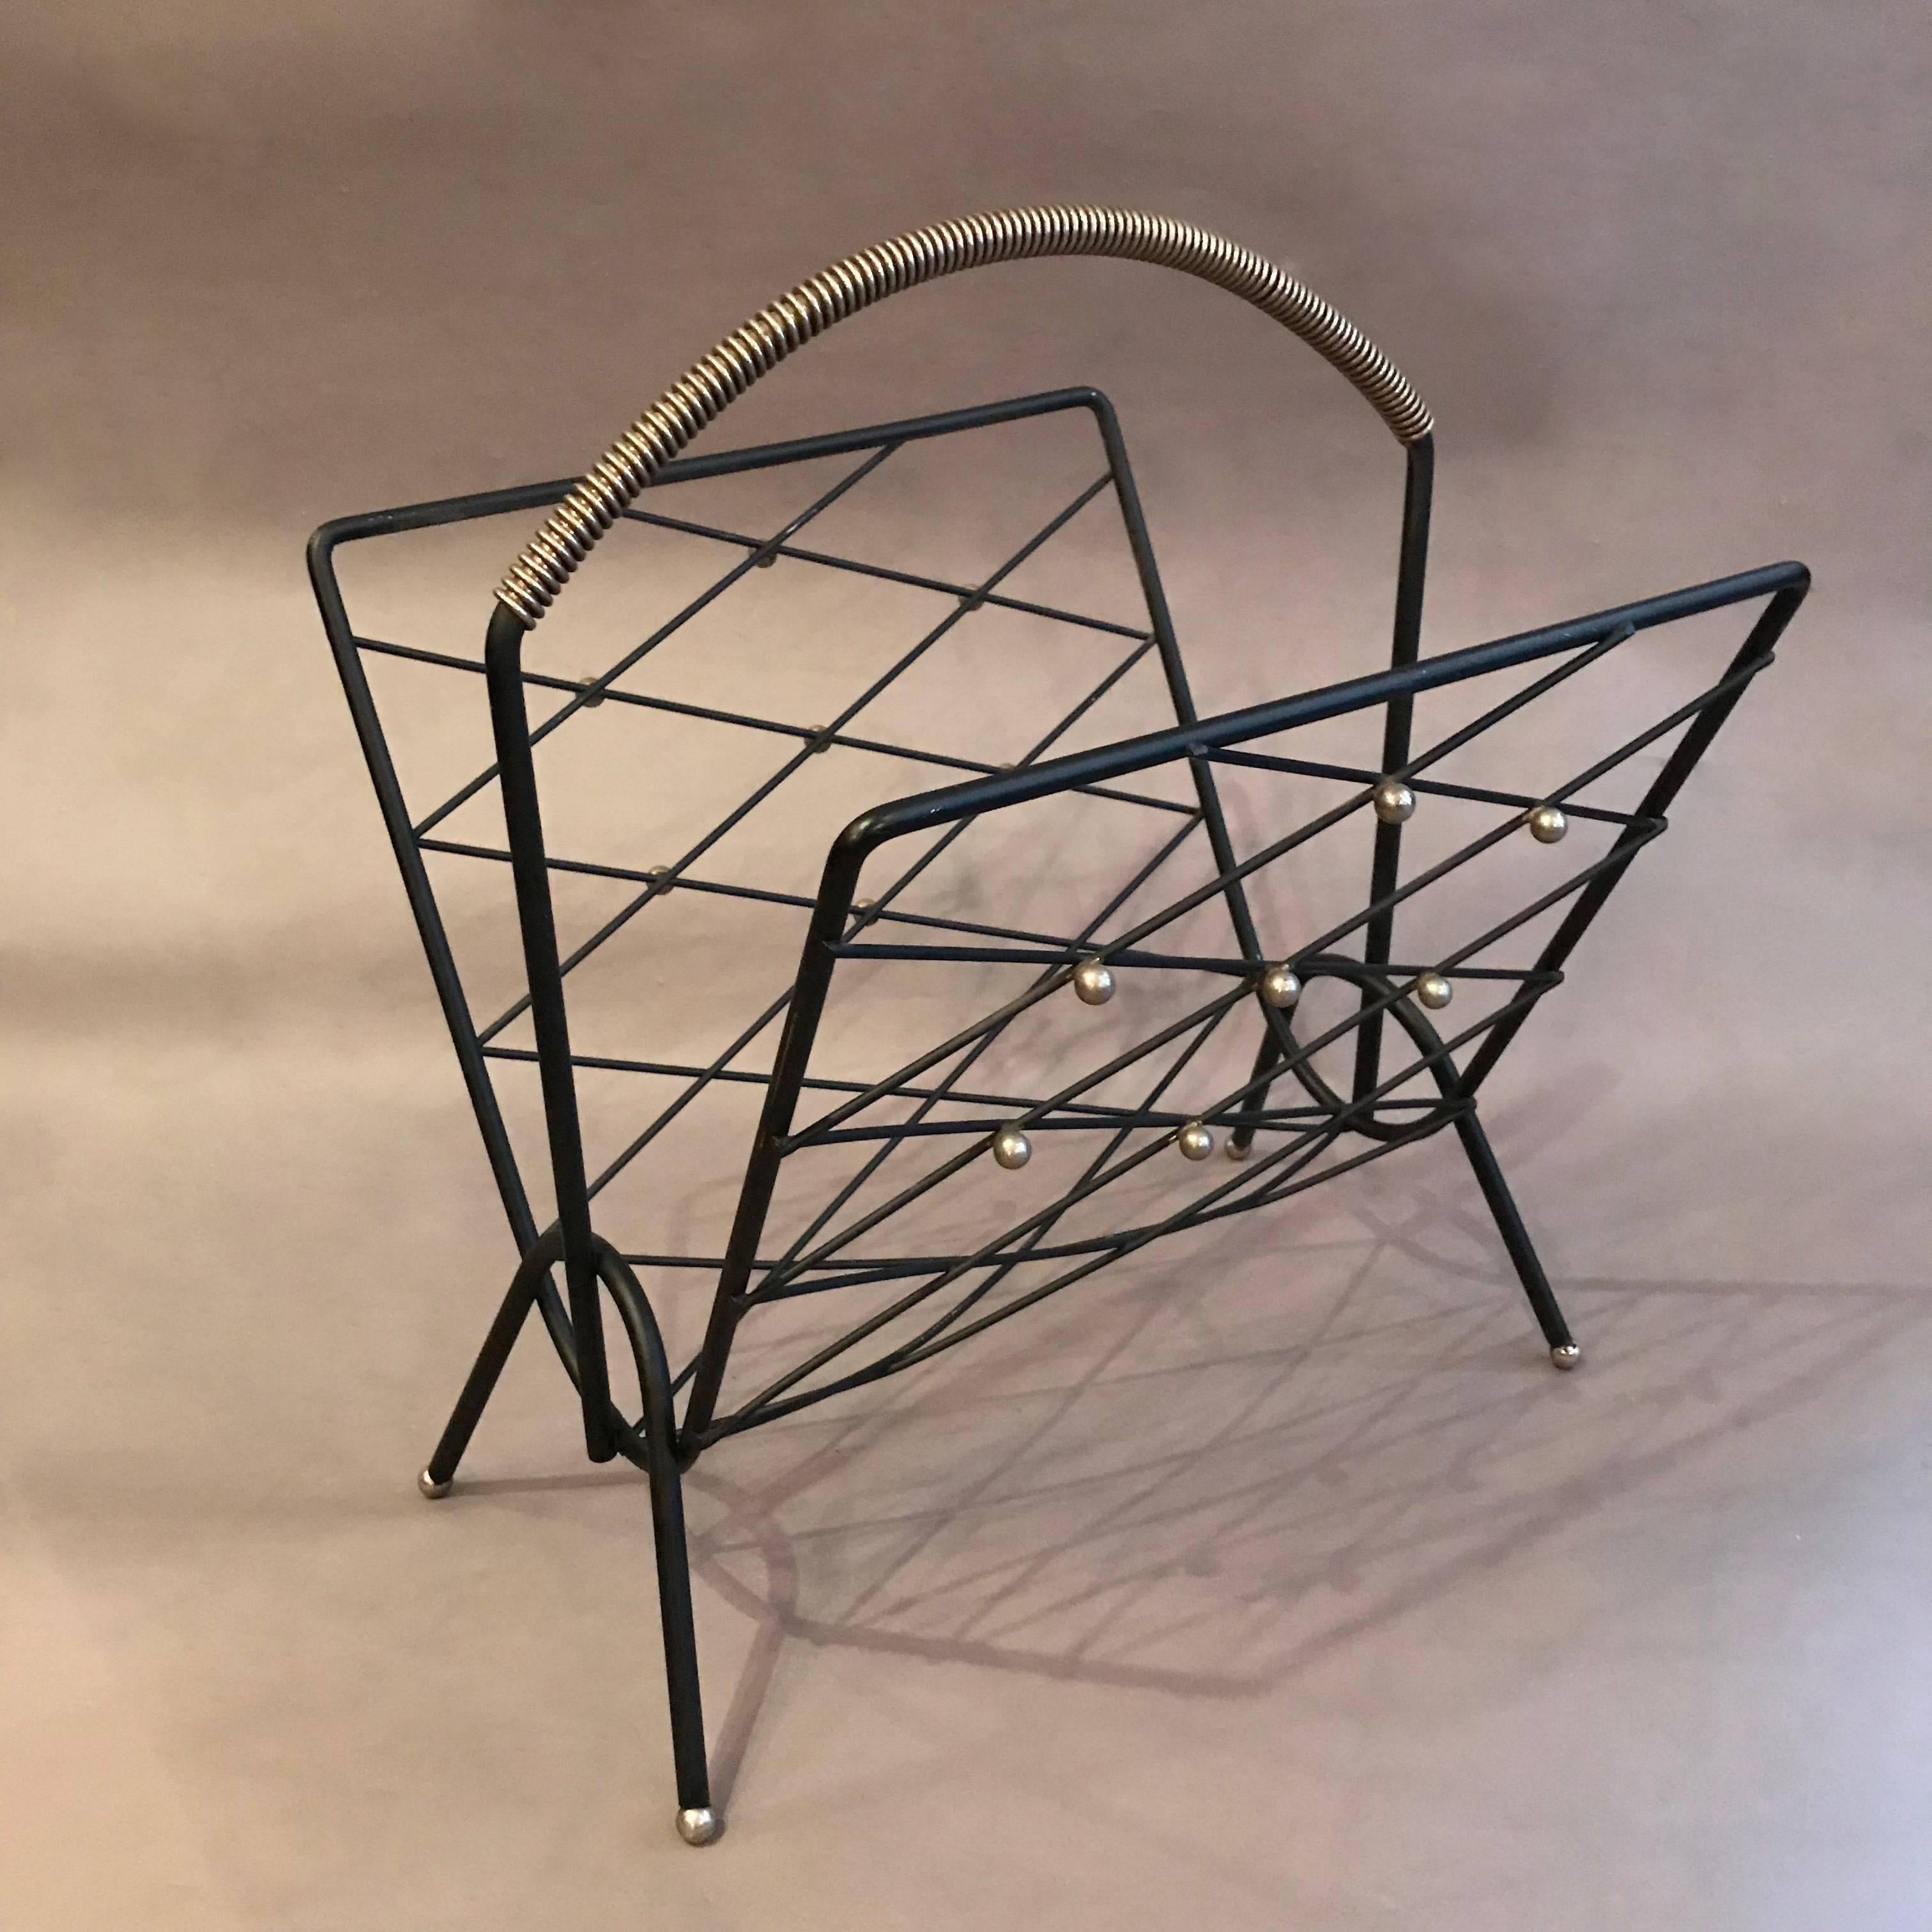 Mid-century modern magazine rack features a lattice wrought iron frame with brass ball accents. Two matching magazine racks are available.